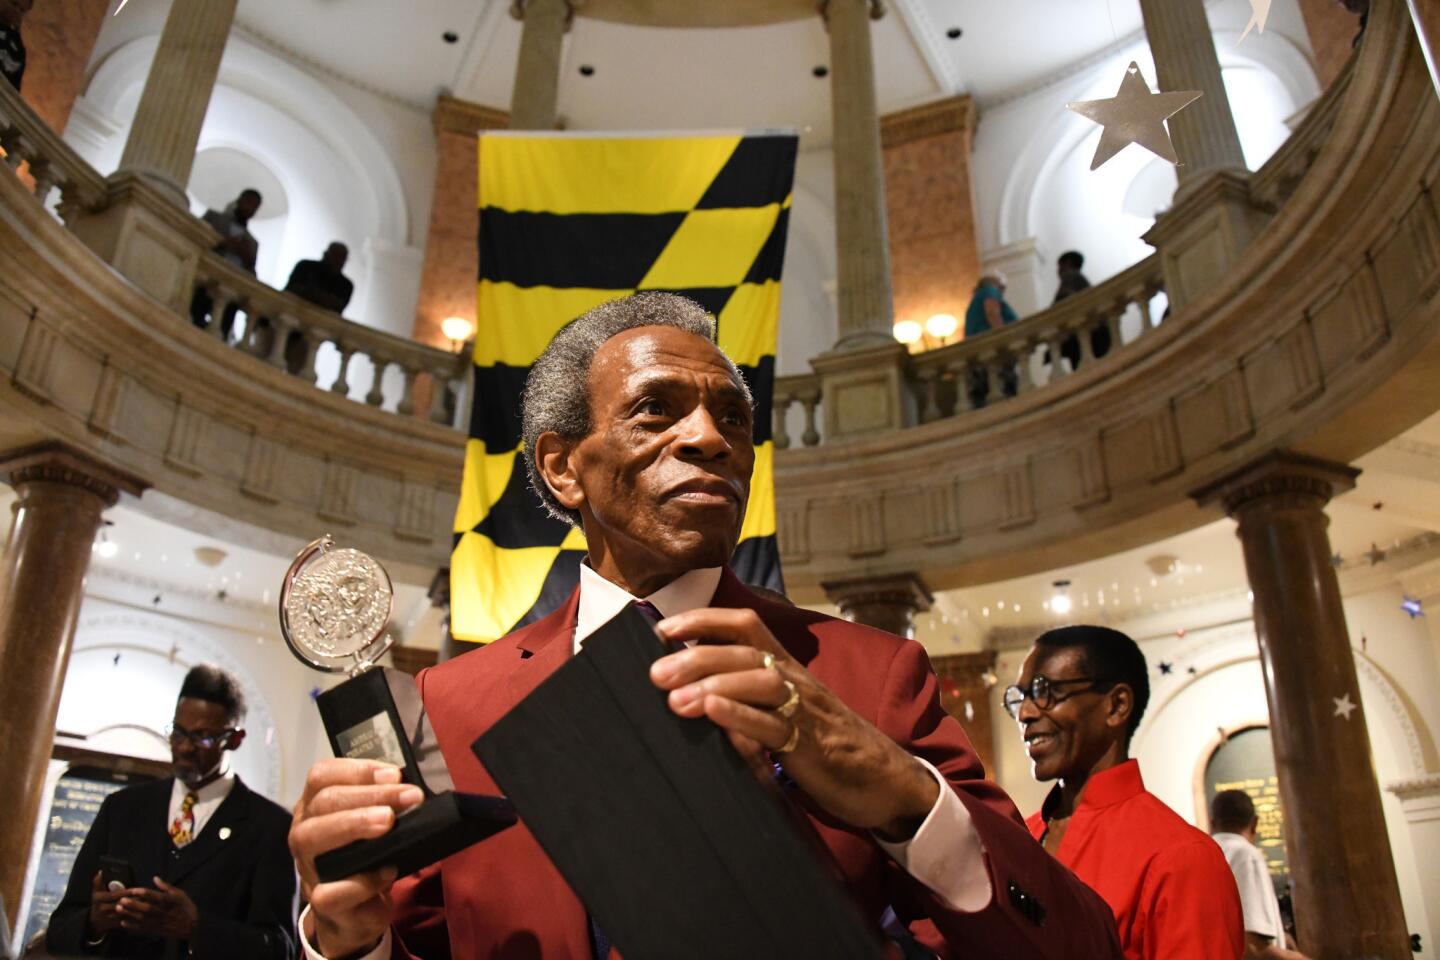 Baltimore actor and director Andre De Shields brought his Tony Award to City Hall. De Shields was given a "Key to the City", from Baltimore Mayor Bernard C. "Jack" Young during a ceremony at City Hall.